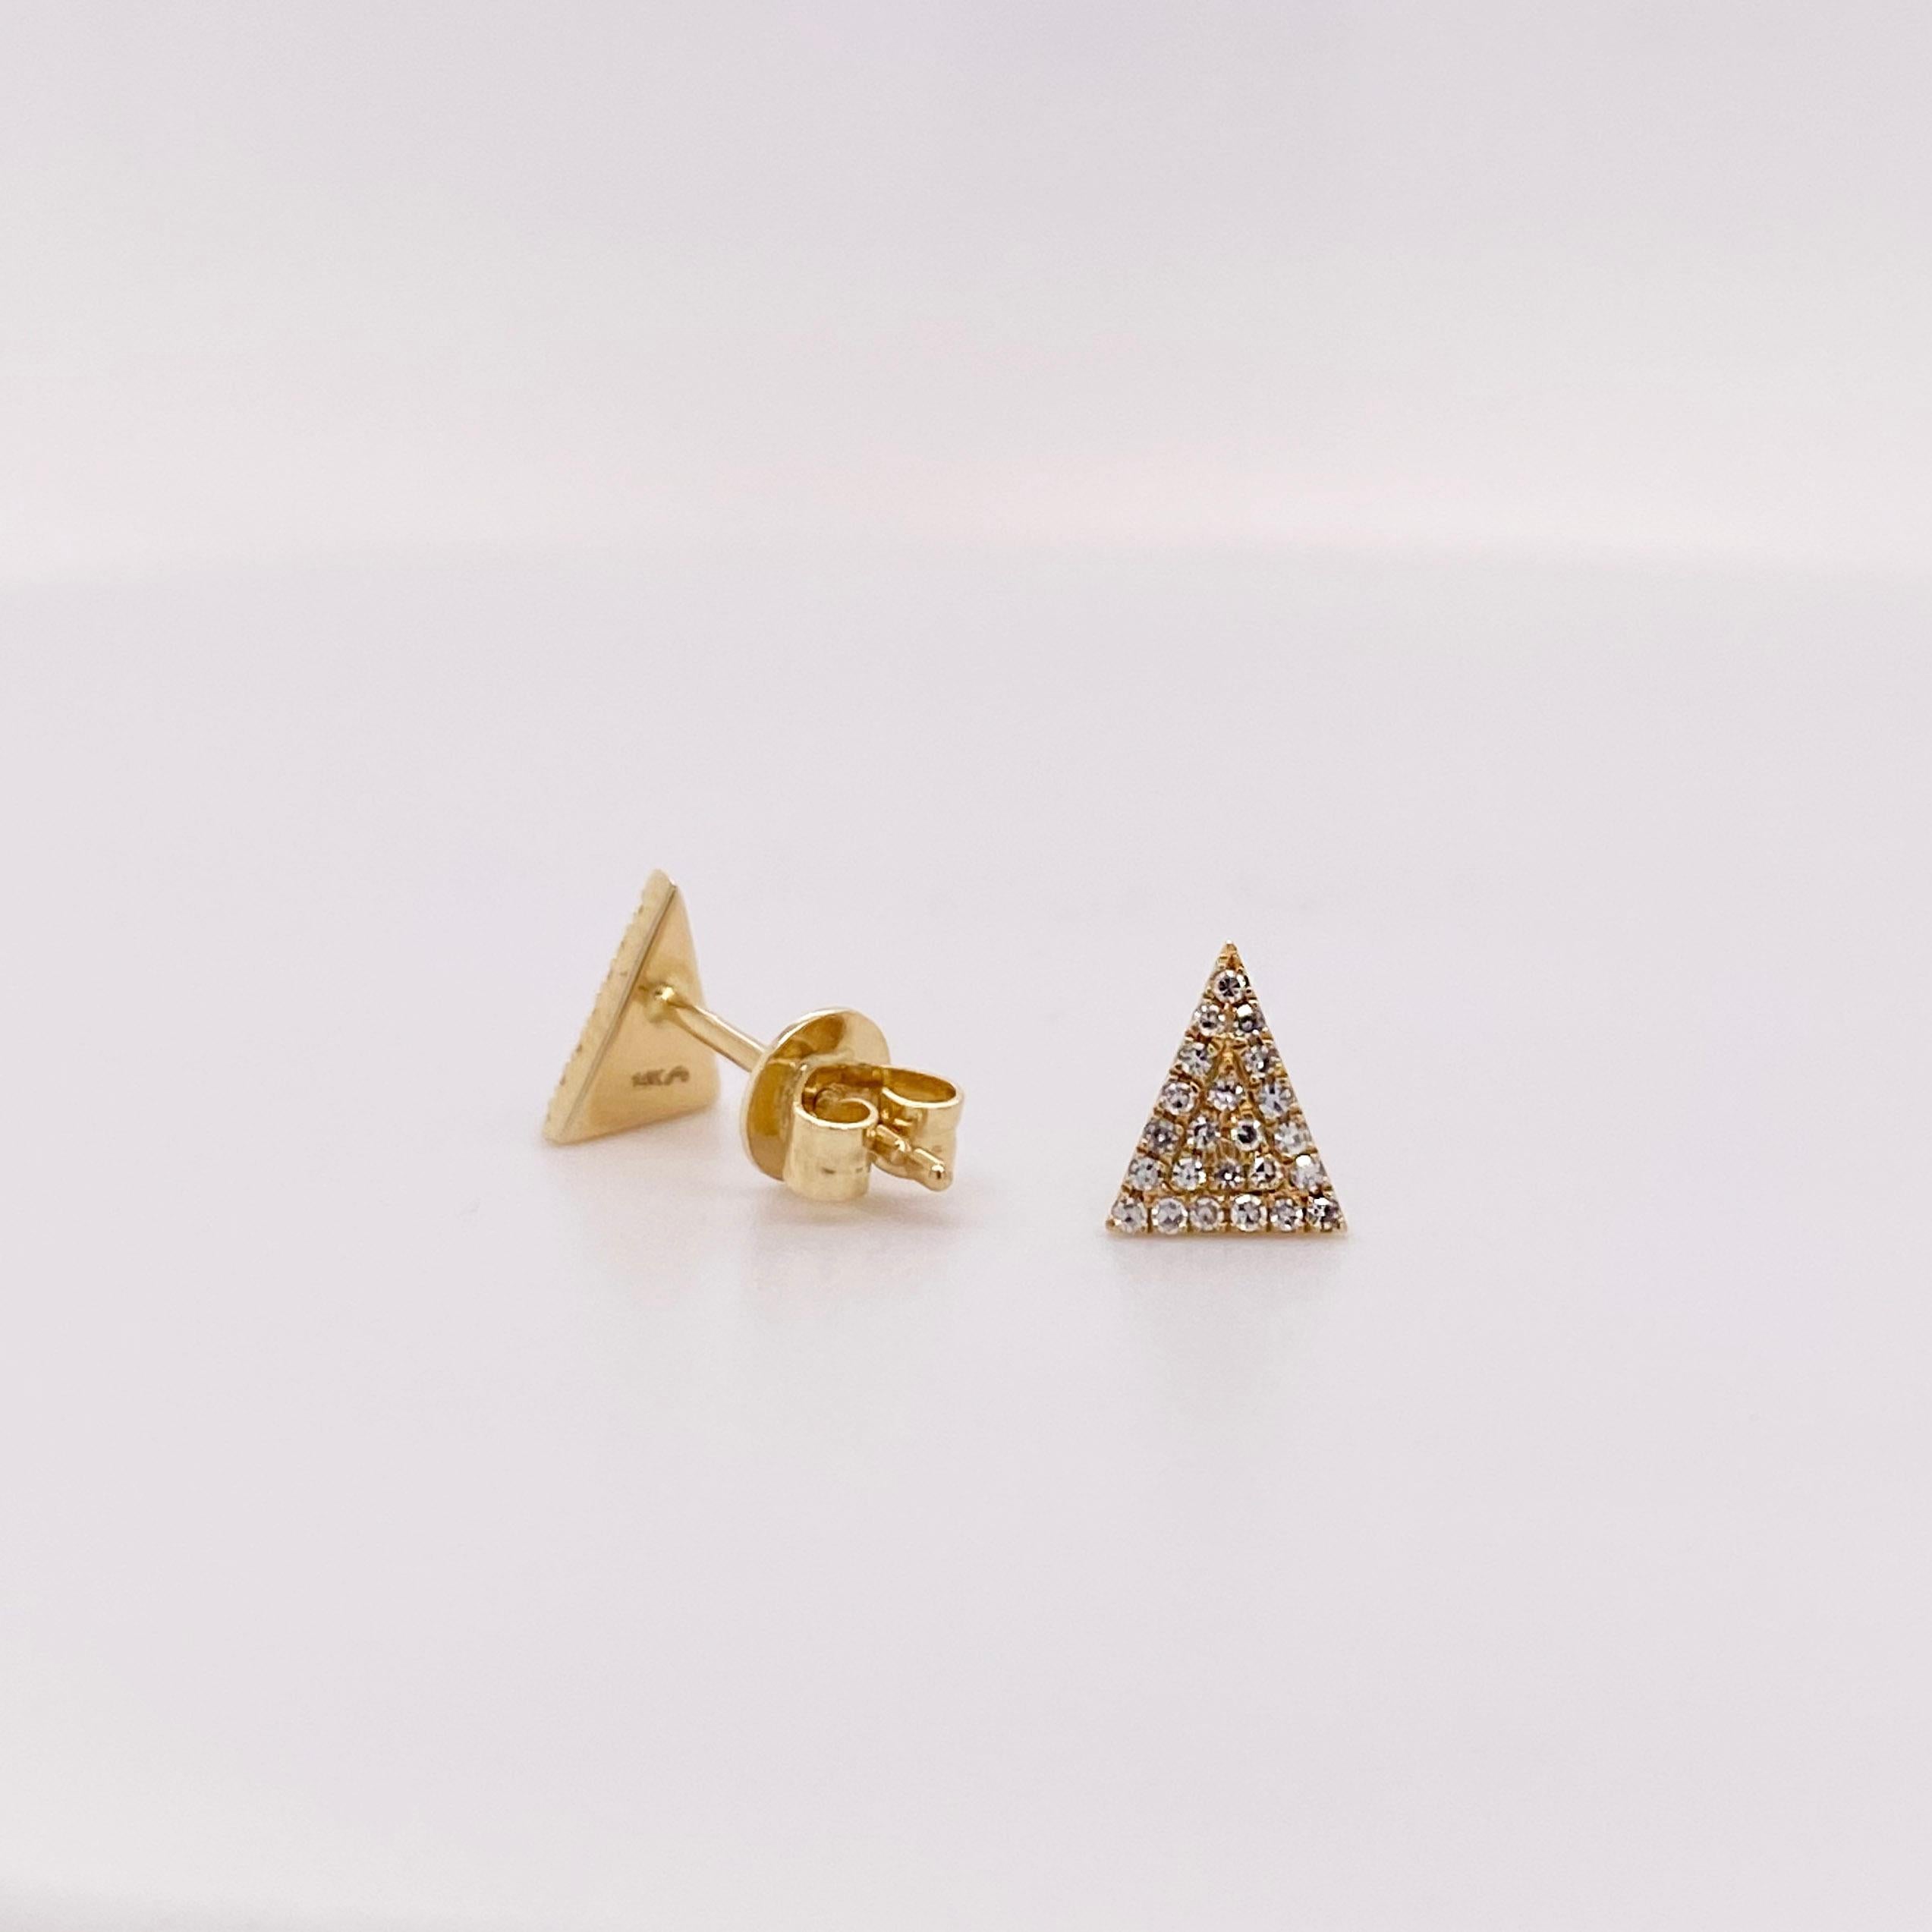 Contemporary Petite Pave Diamond Triangle Stud Earrings in 14K Yellow Gold 1/10 Carat For Sale